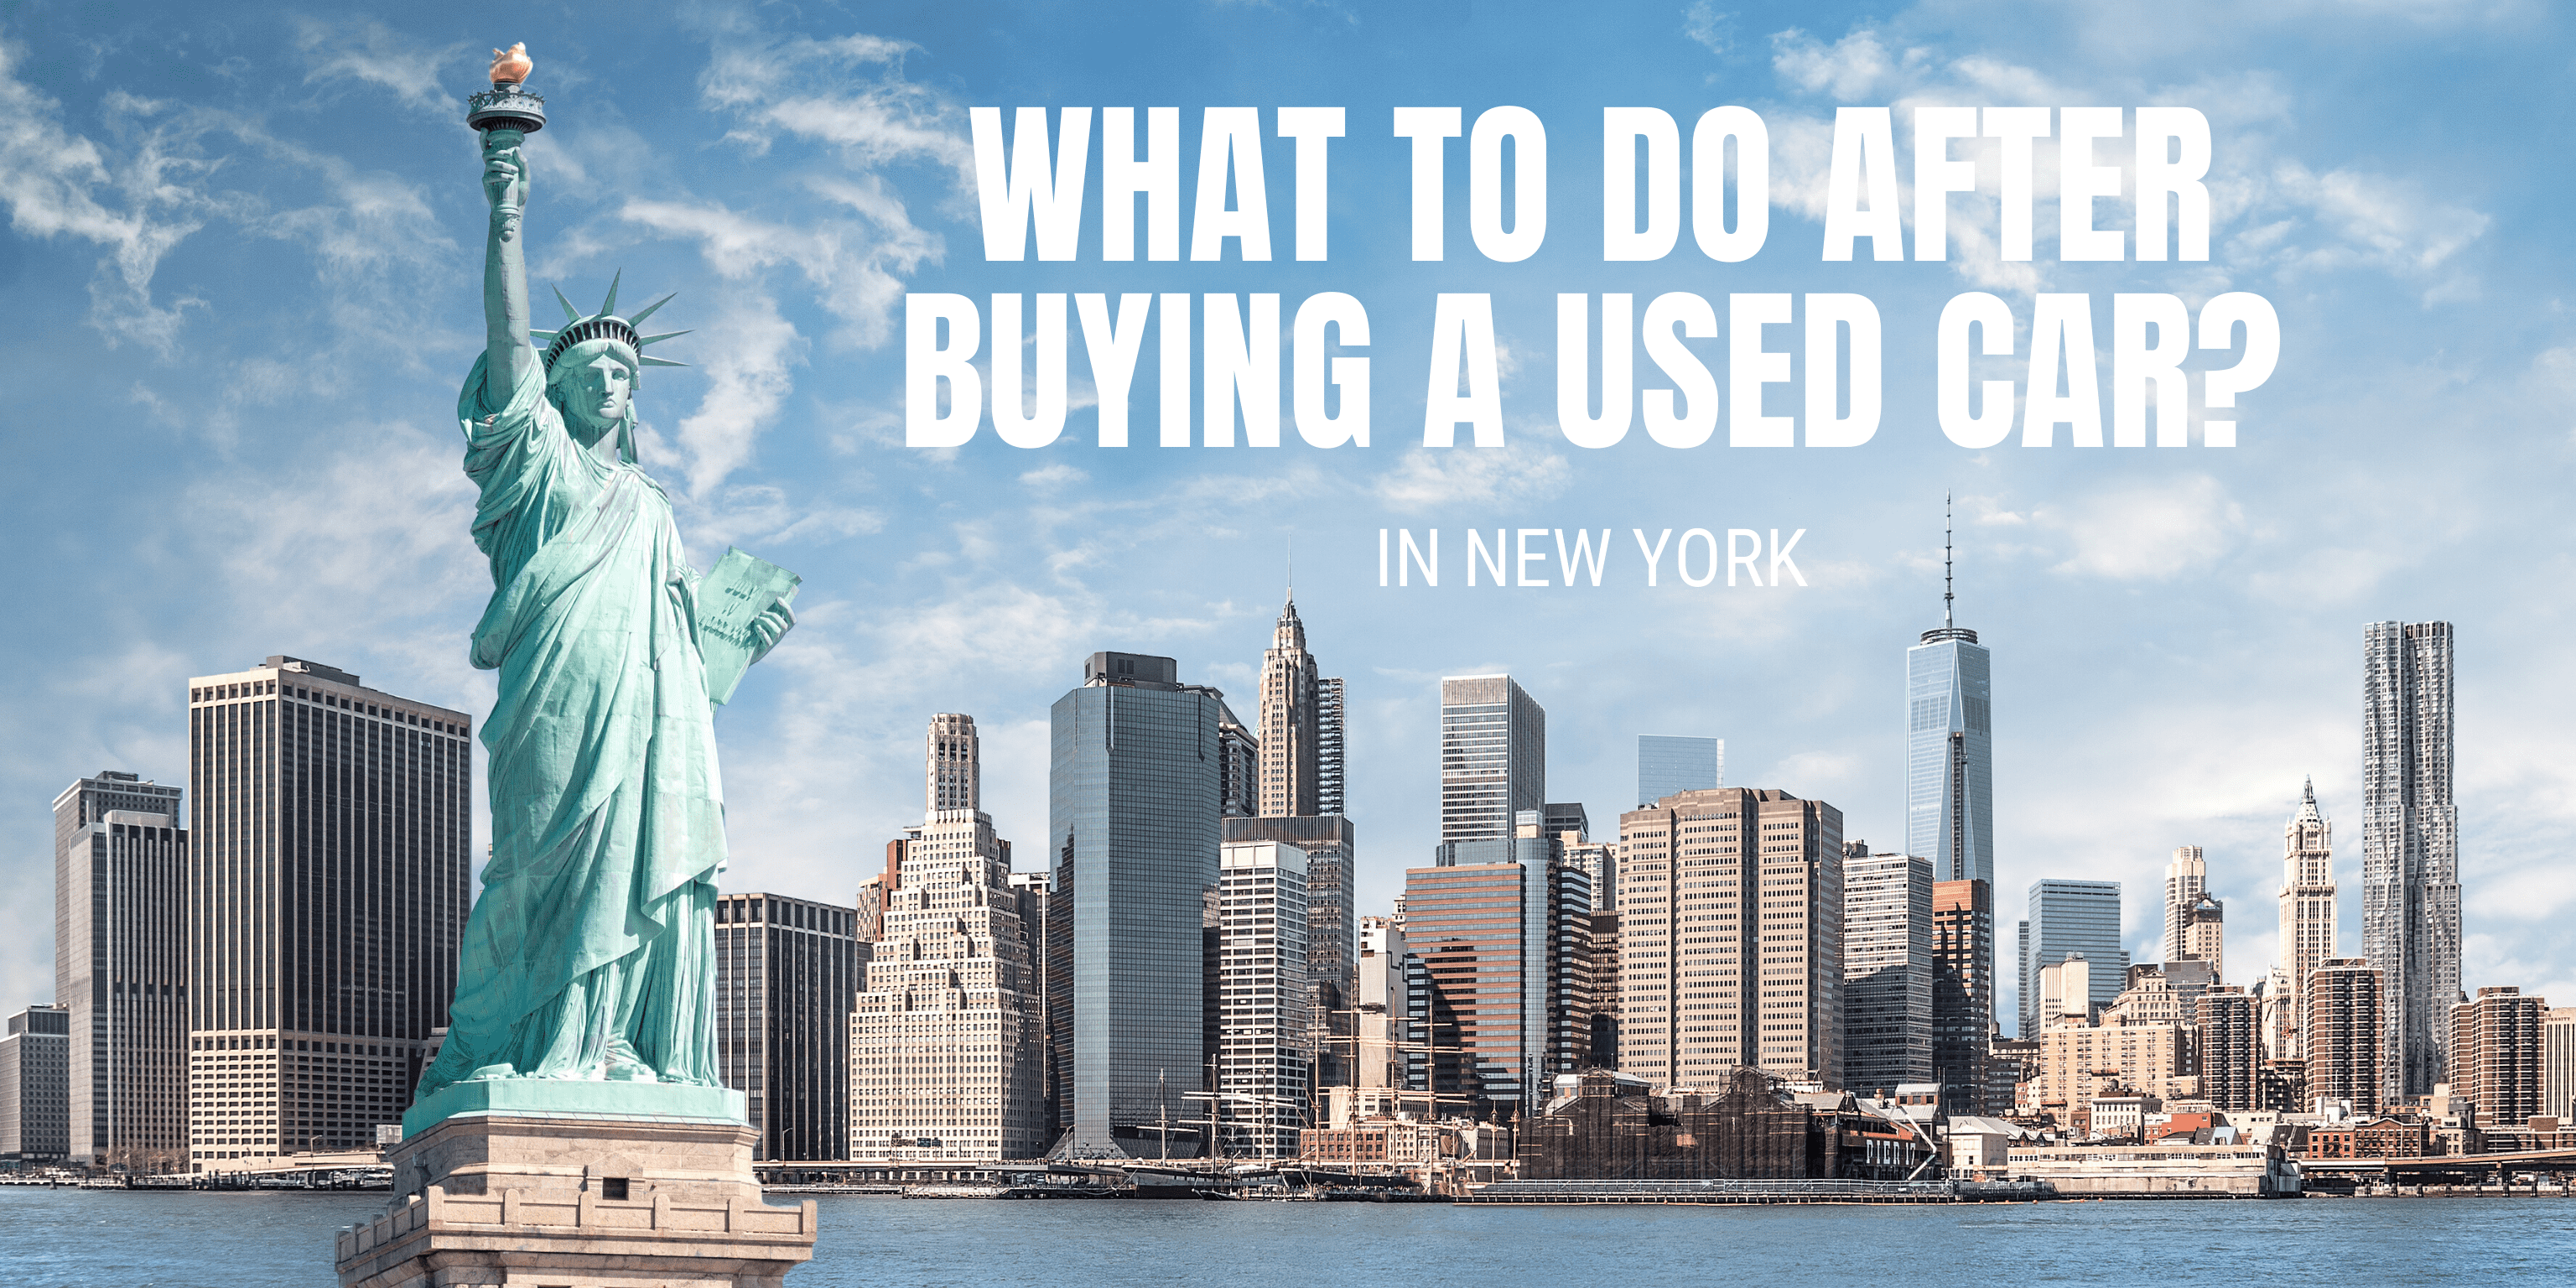 What to Do After Buying a Used Car in New York?